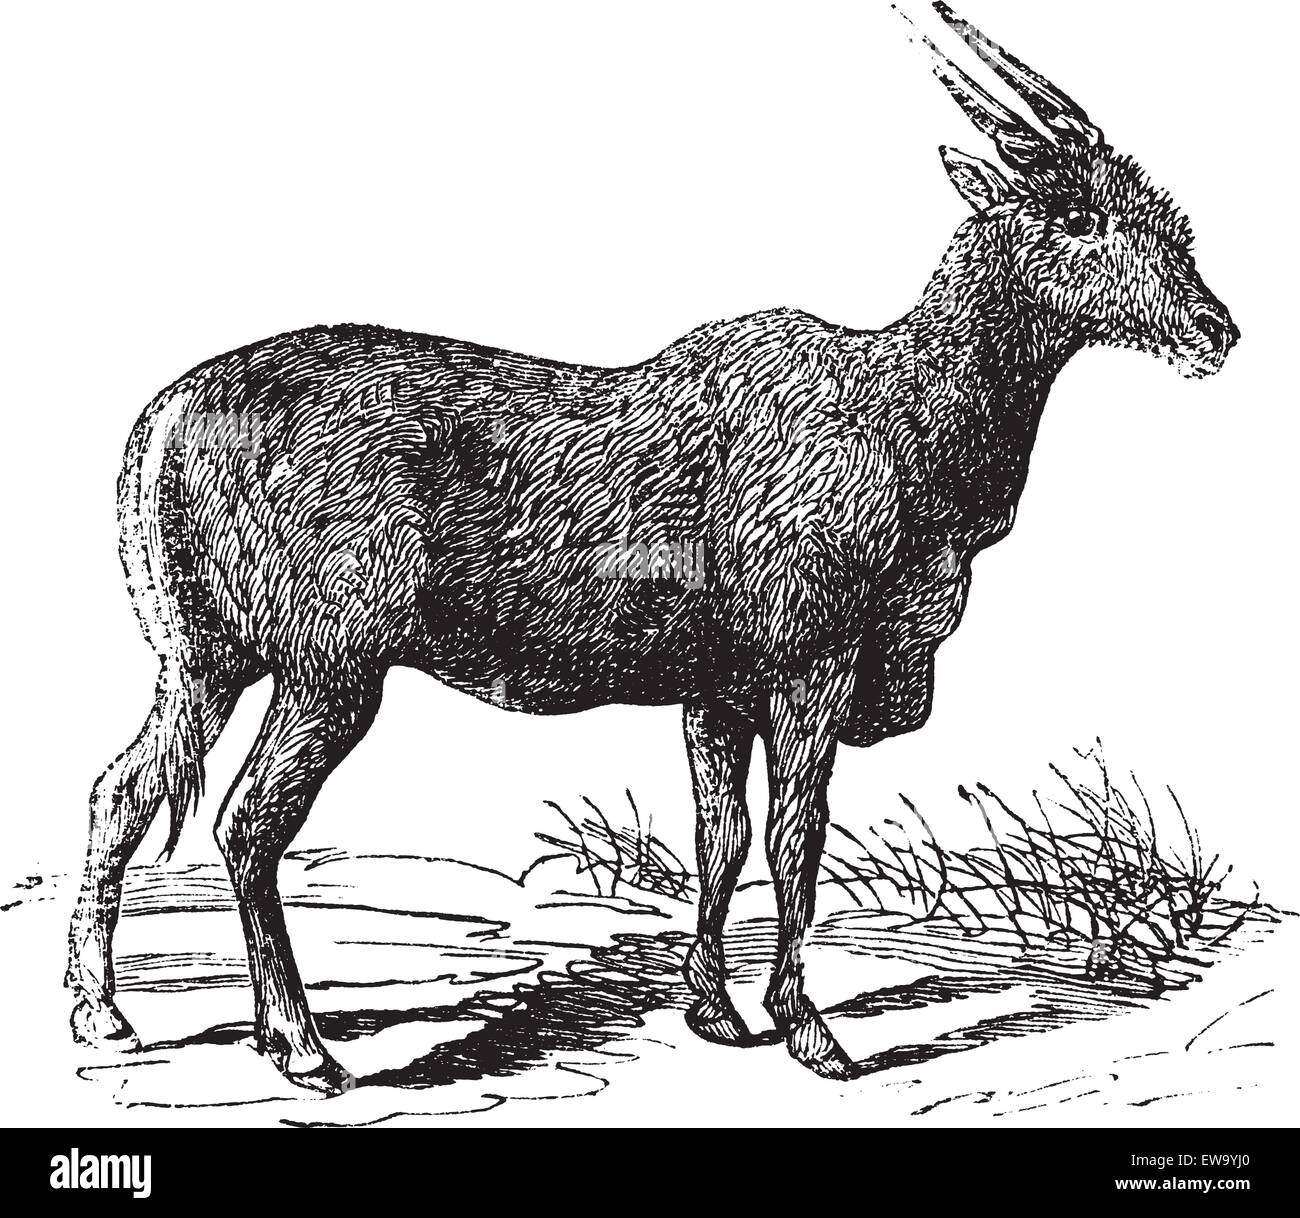 Oreas Canna, Eland or South African antelope vintage engraving. Old engraved illustration of African antelope. Stock Vector